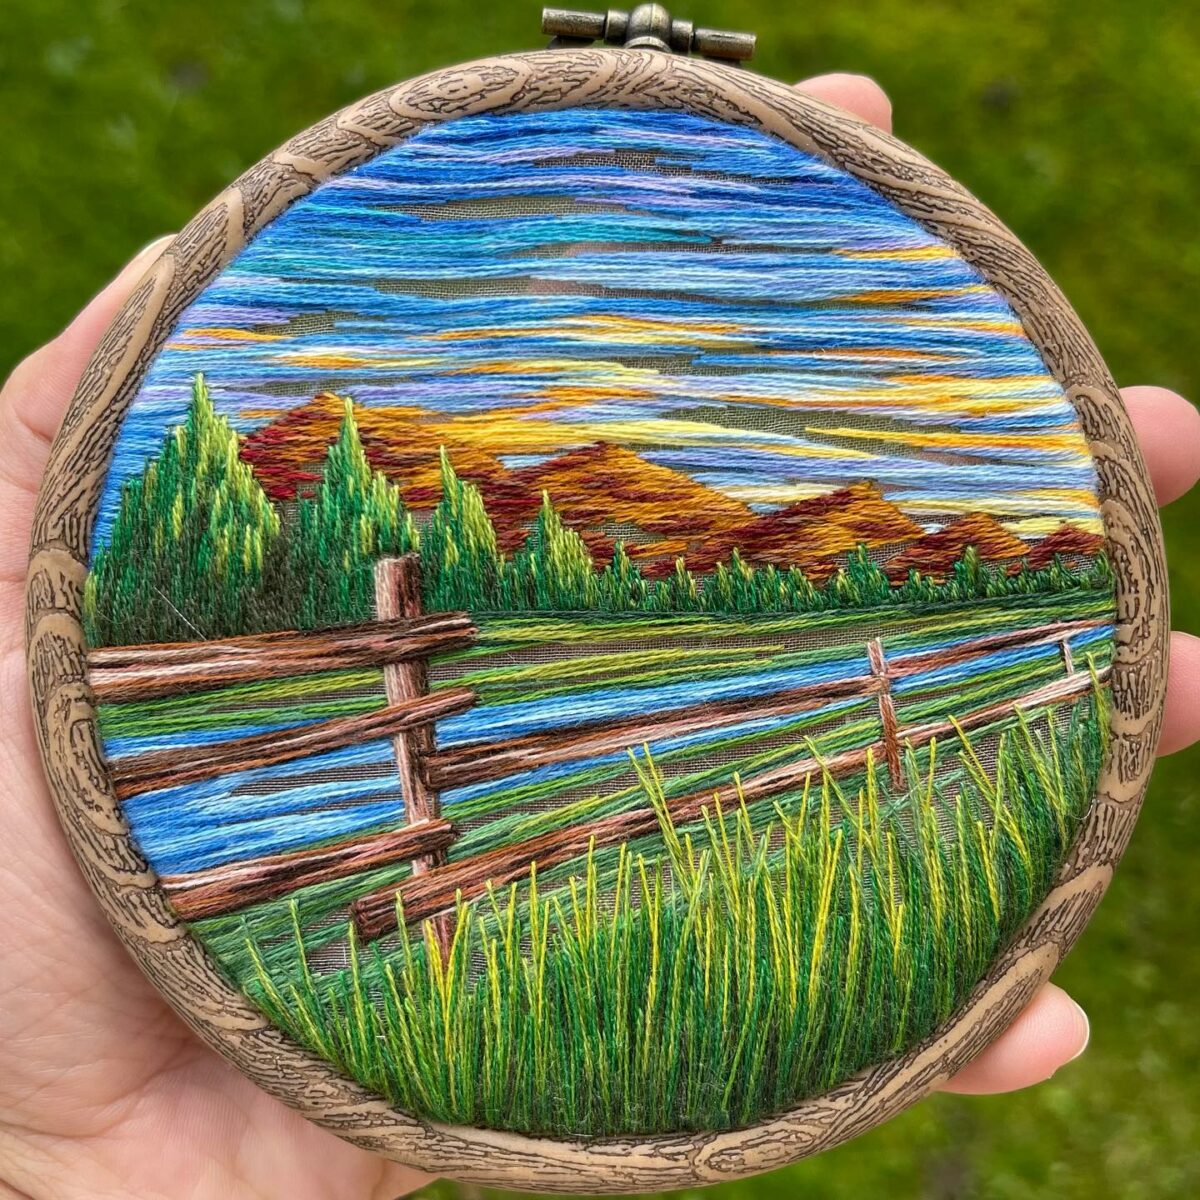 Gorgeous Embroidery Hoop Arts Of Natural Landscapes By Sew Beautiful 6